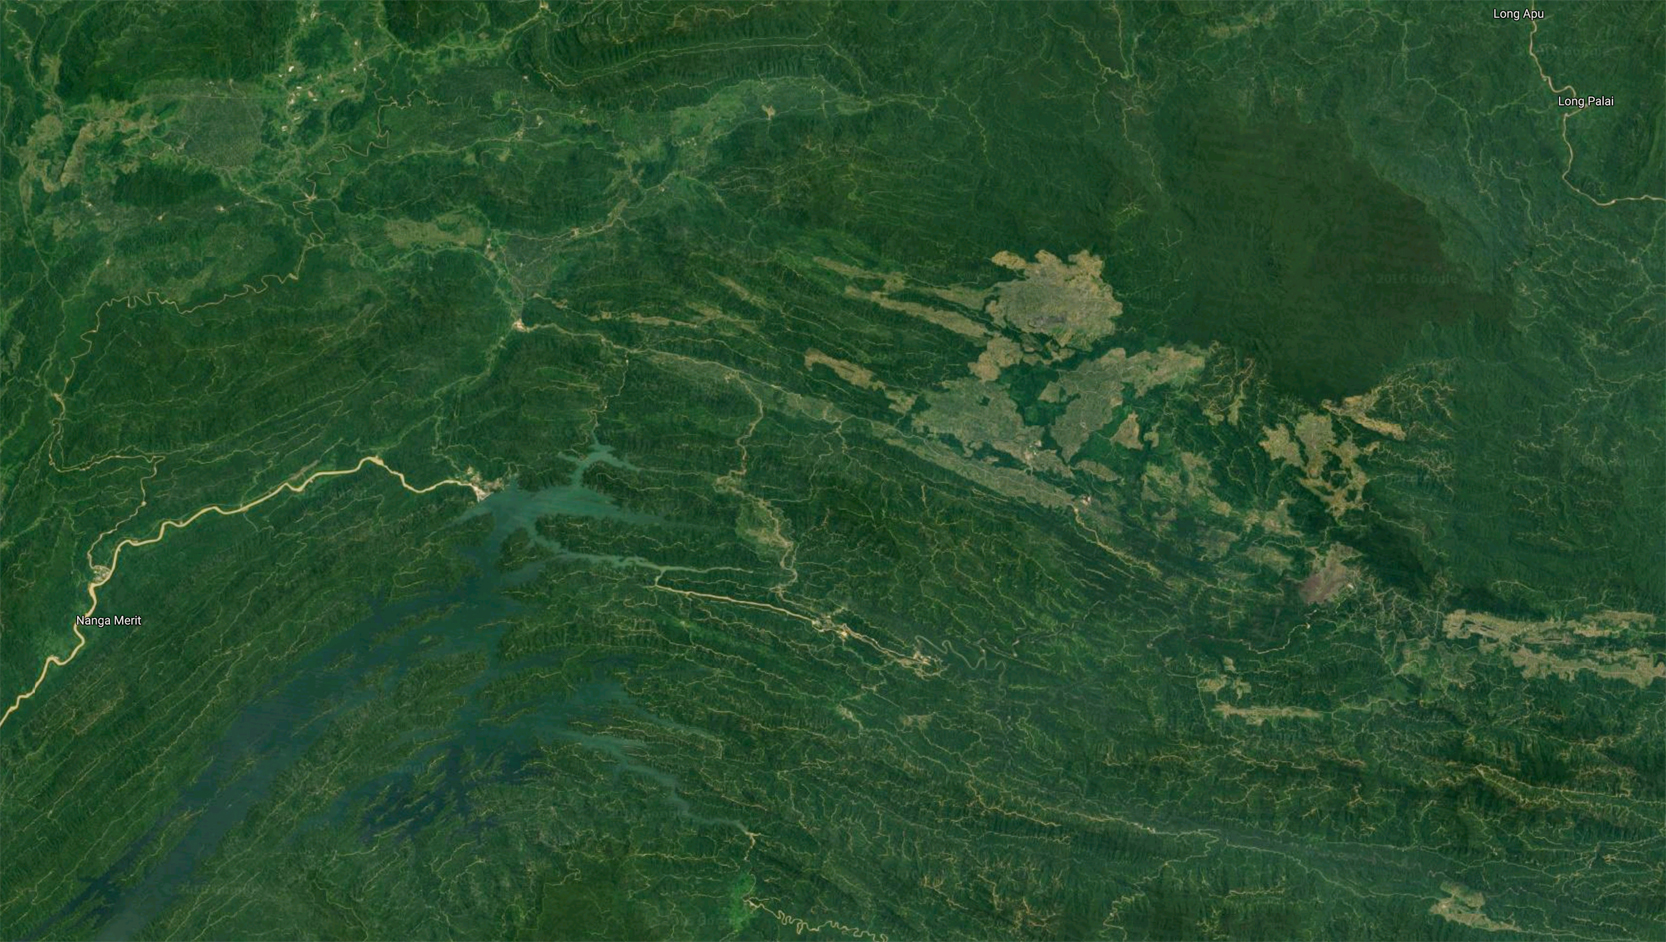 Google Earth image showing deforestation, dams, and logging on lands traditionally managed by indigenous peoples in Sarawak.